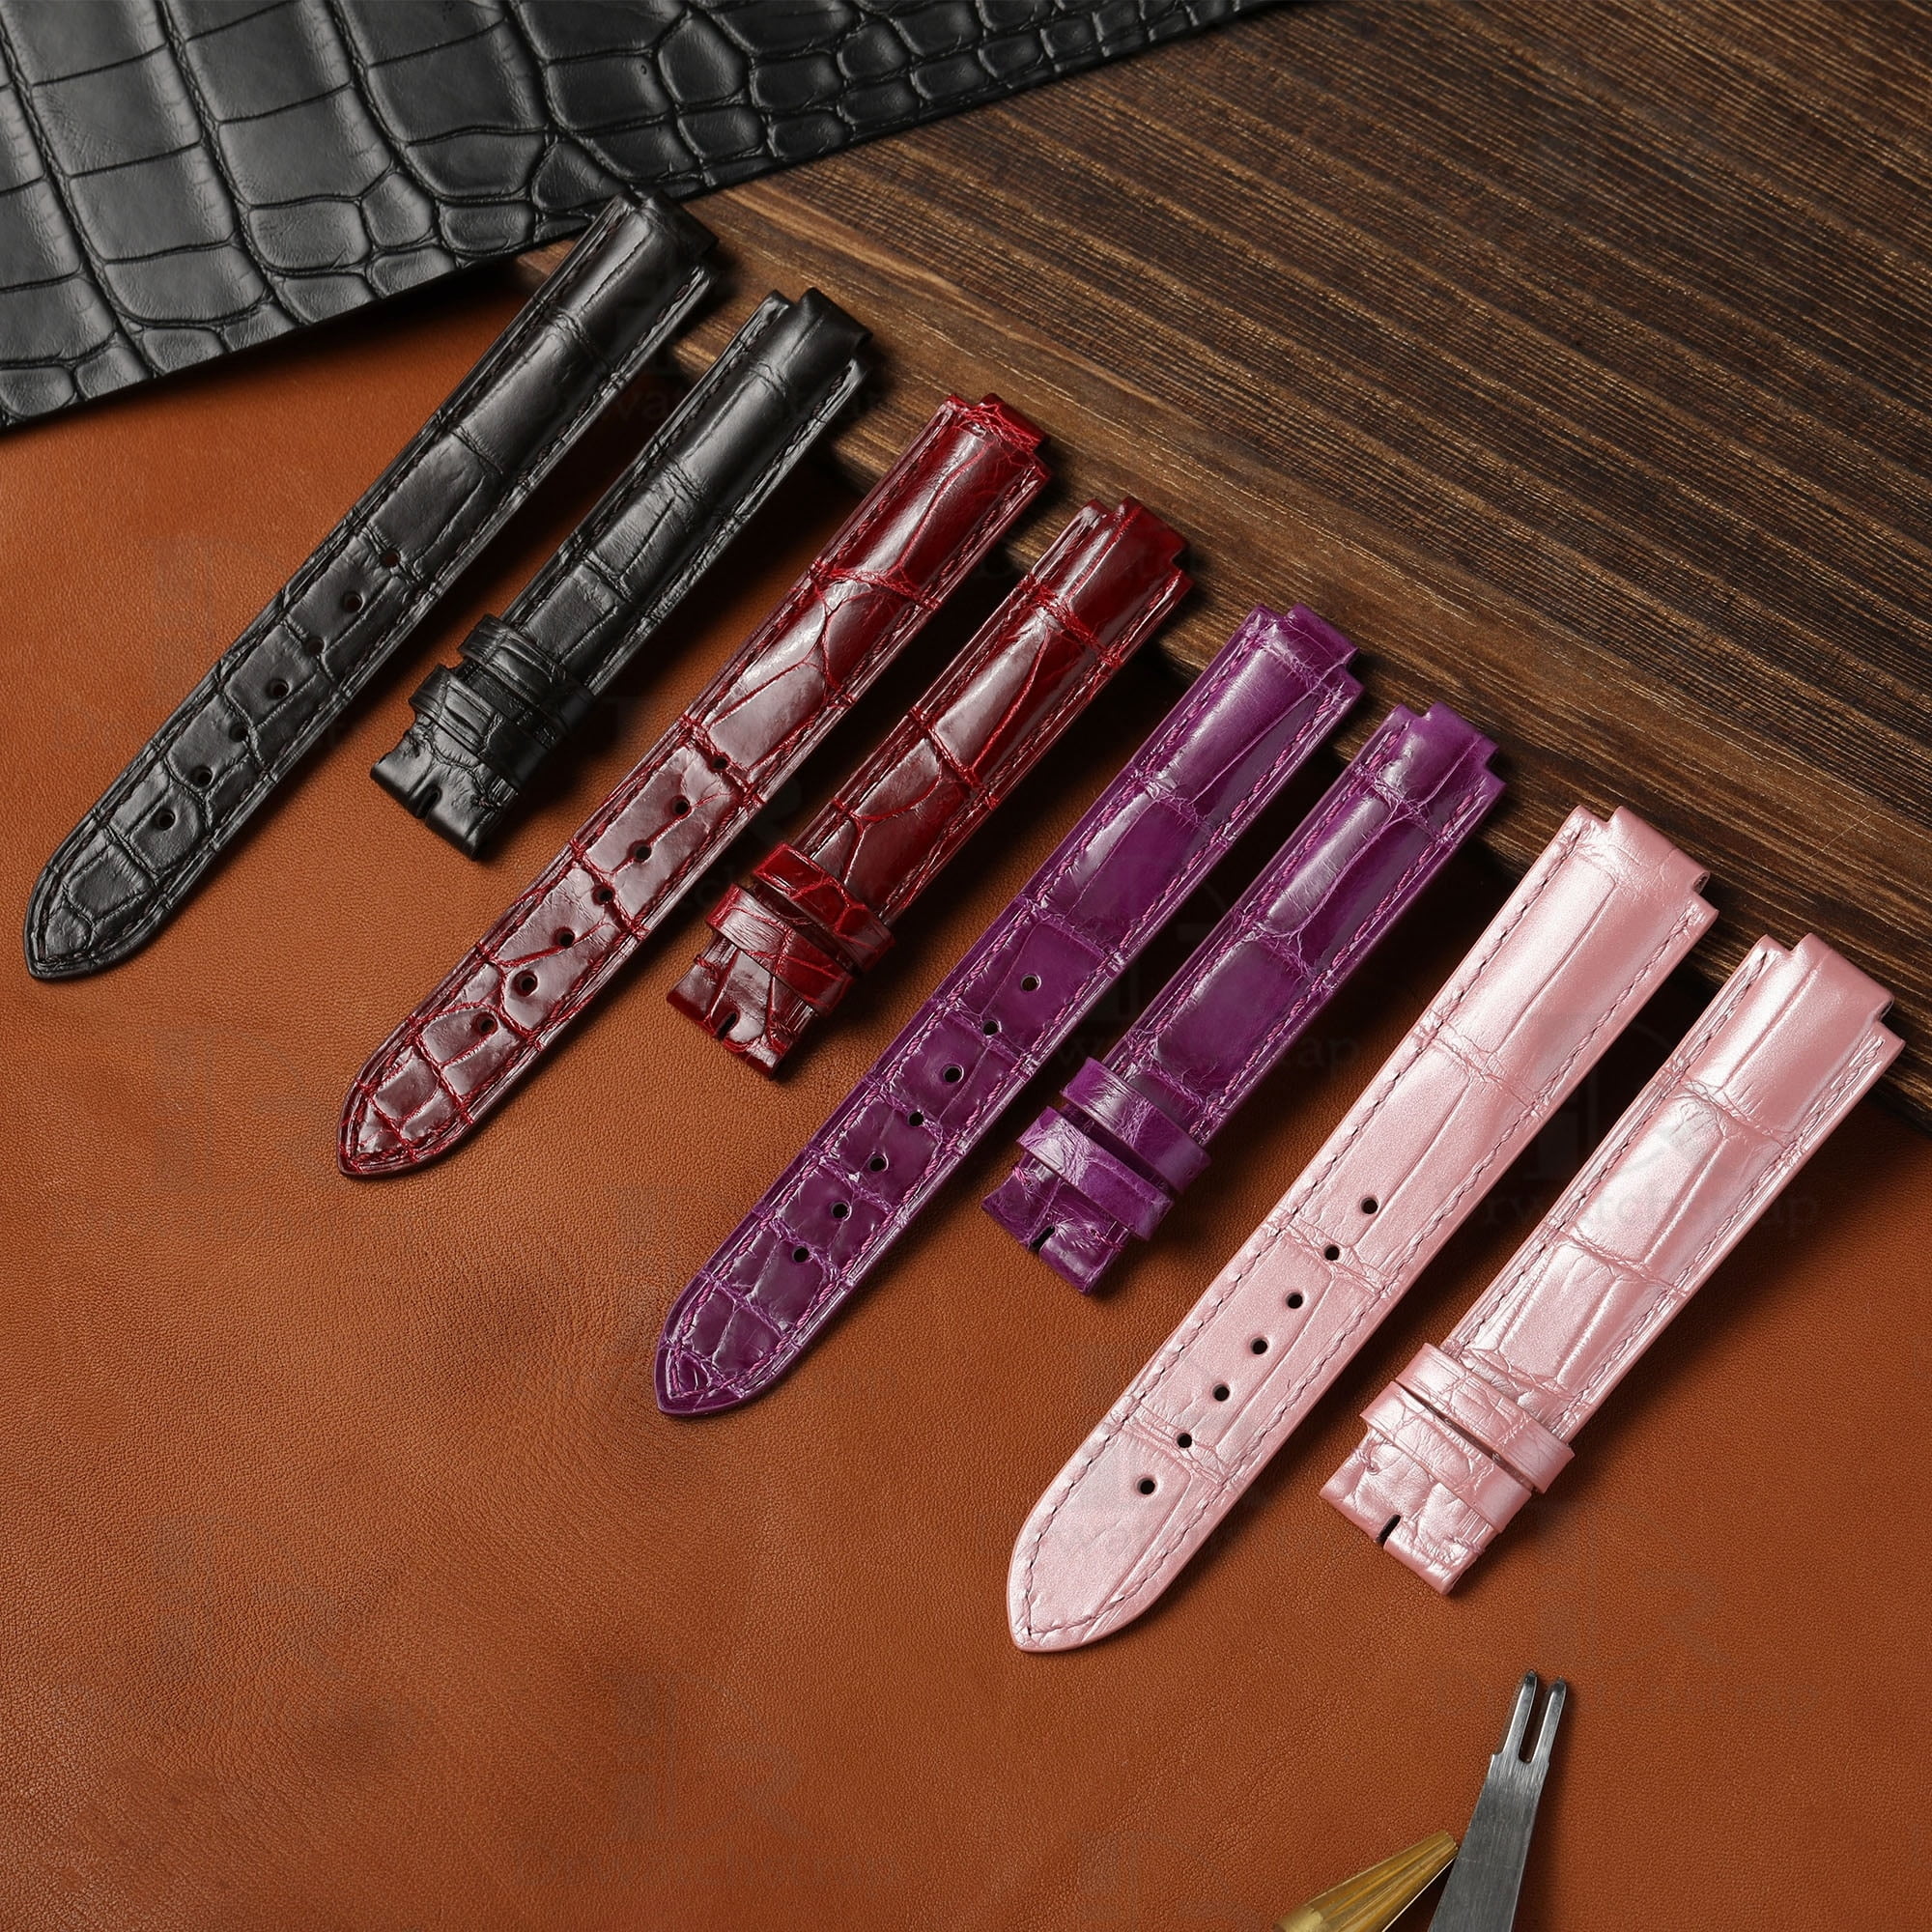 Genuine best quality OEM custom American Alligator black red pink purple Belly-scale replacement Cartier Ballon Bleu de watch leather strap & watch band with pin buckle from dr watchstrap for Cartier de Ballon Bleu watches online - Shop the high-end watch straps & watchbands at a low price